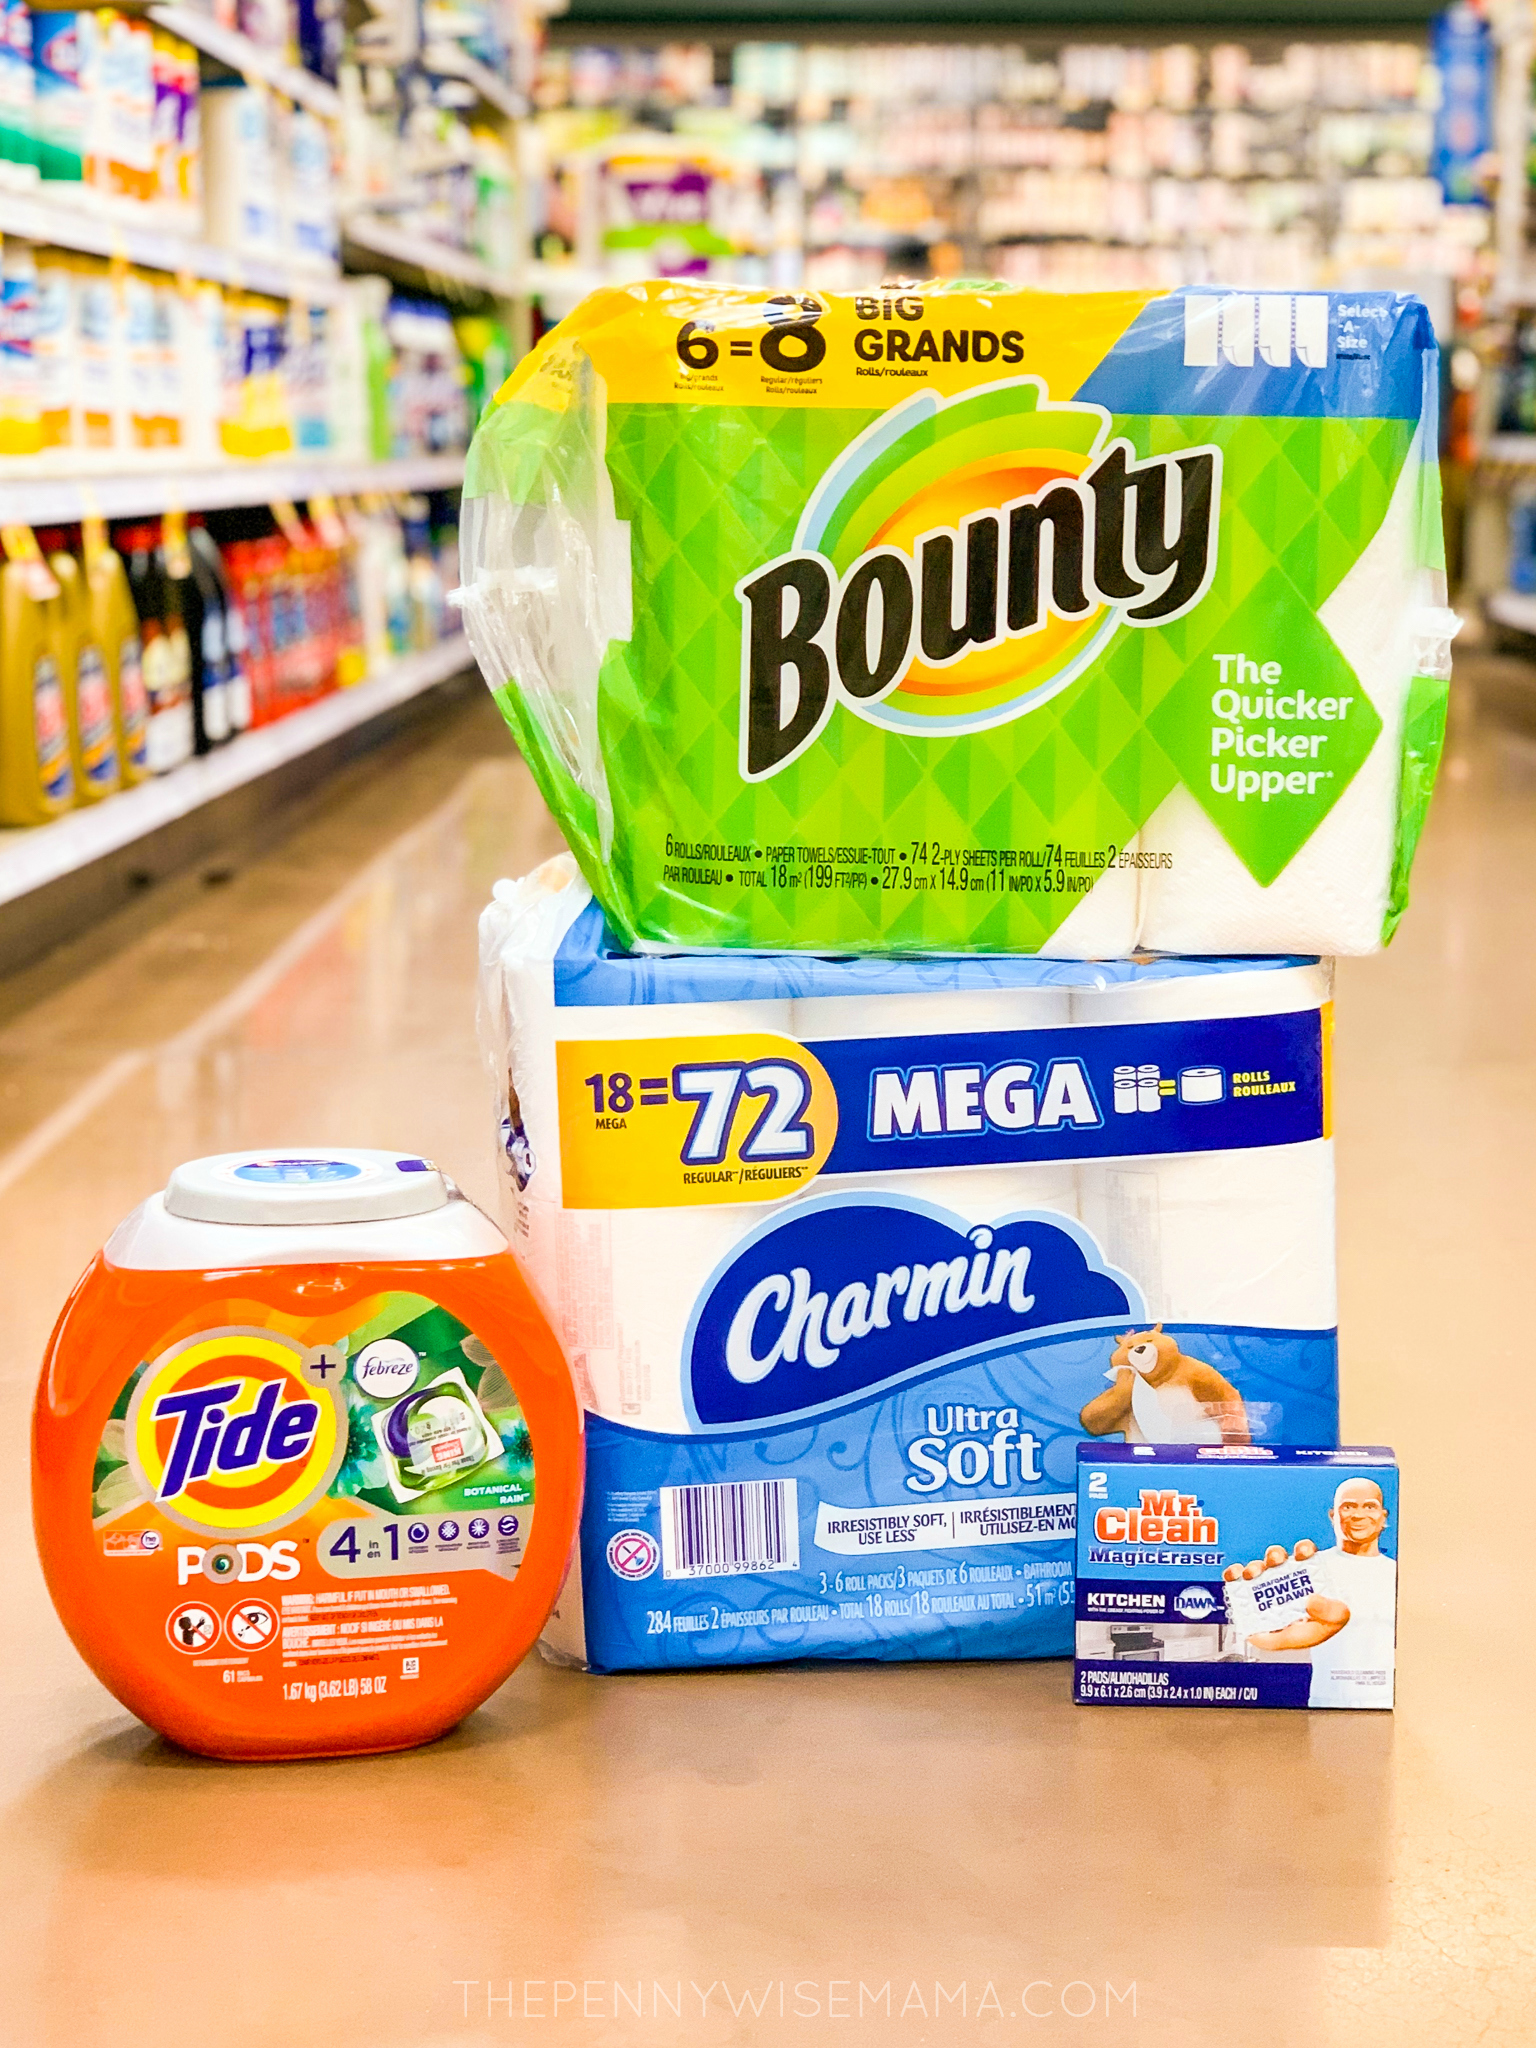 P&G 2023 Holiday Savings Promotion - Get a $15 Visa Gift Card with $50  Spend on Qualifying P&G Products or $5 Gift Card with $20 Spend - Savings  Beagle